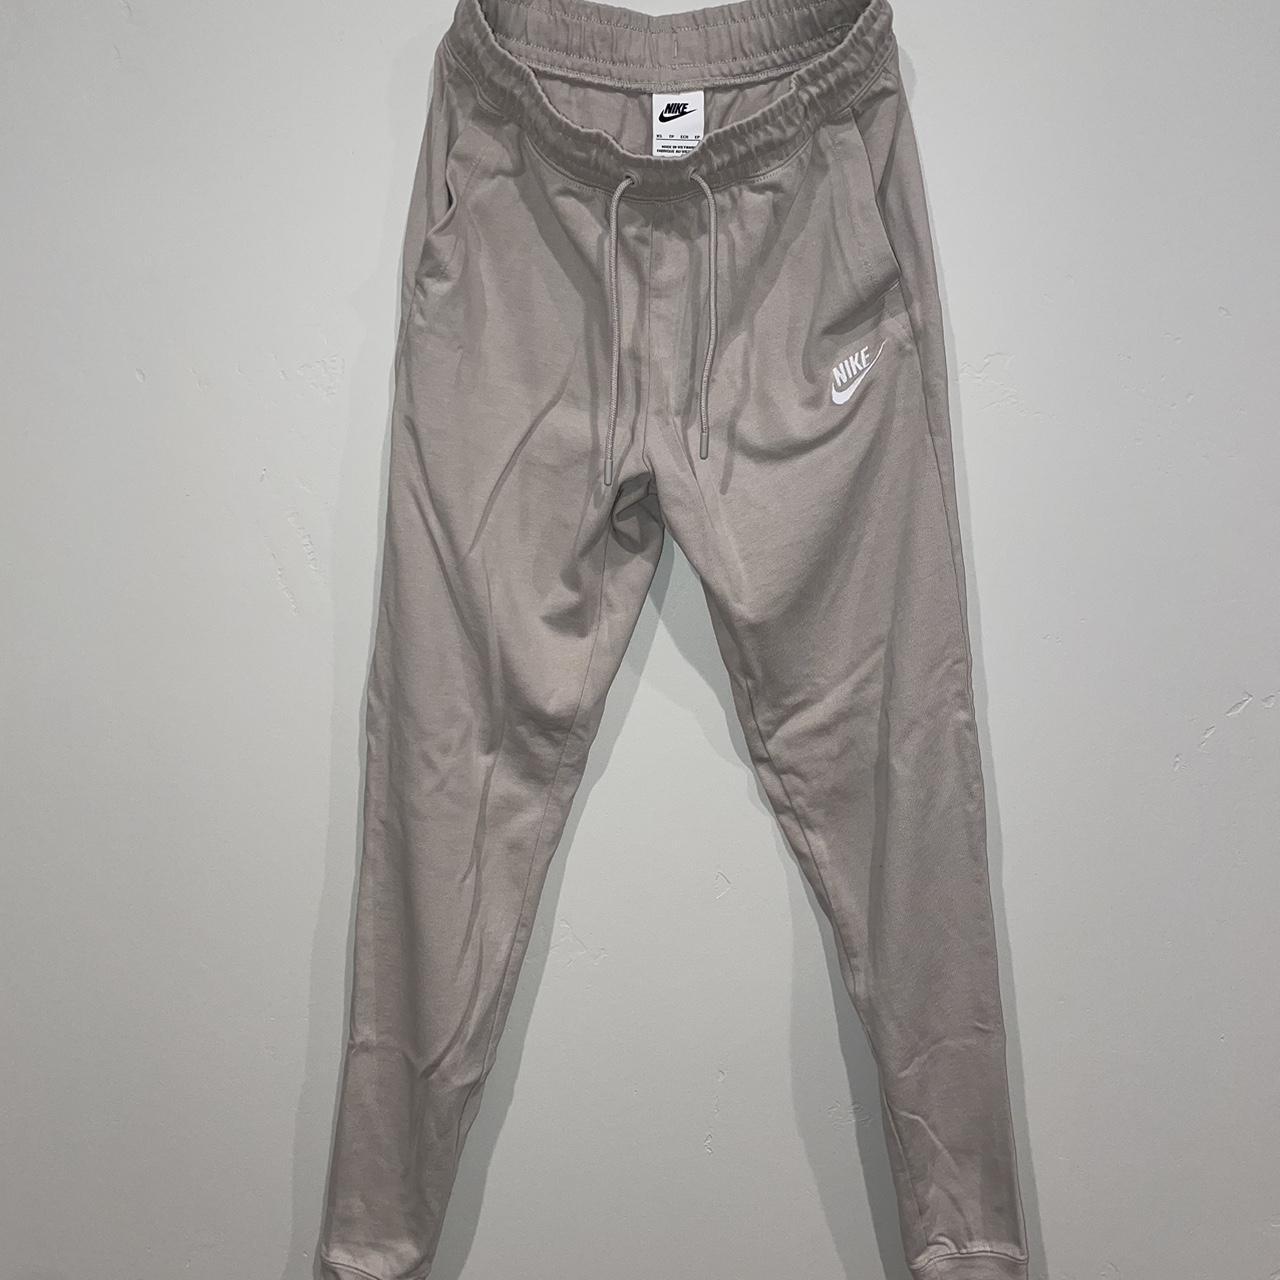 Nike Women's Tan and Cream Joggers-tracksuits